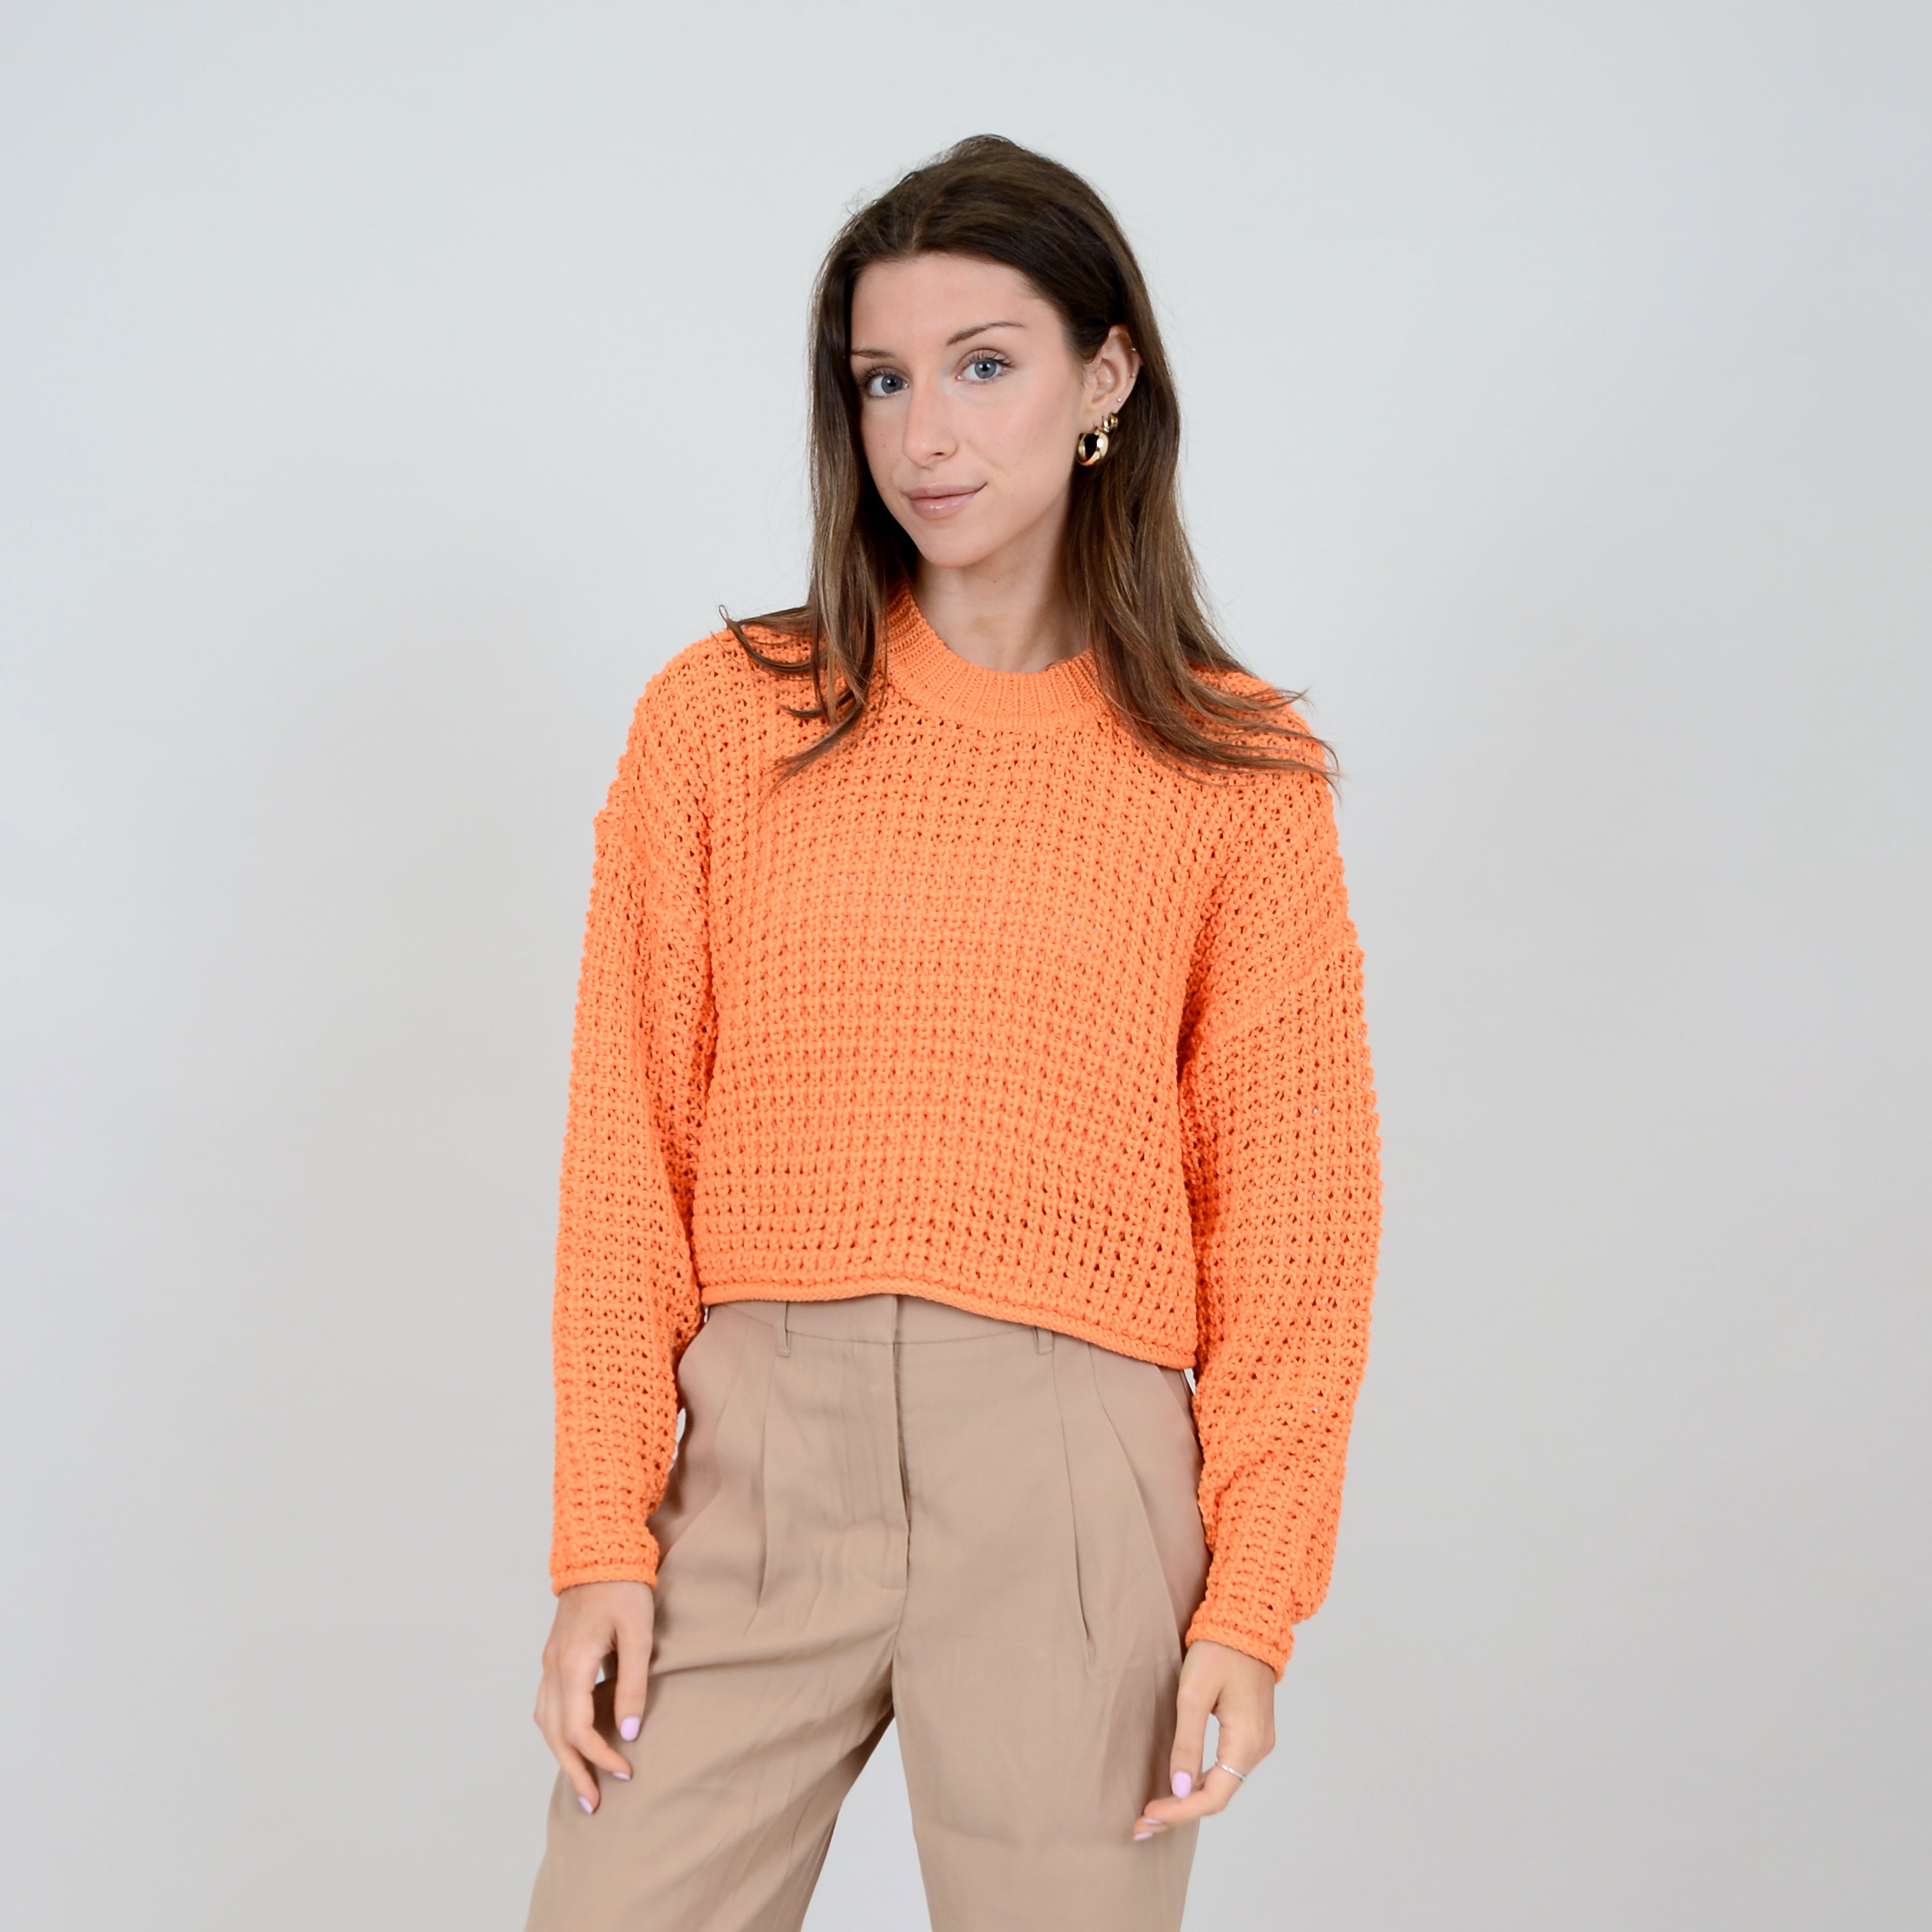 RD Style - Darla Cropped Sweater in Apricot